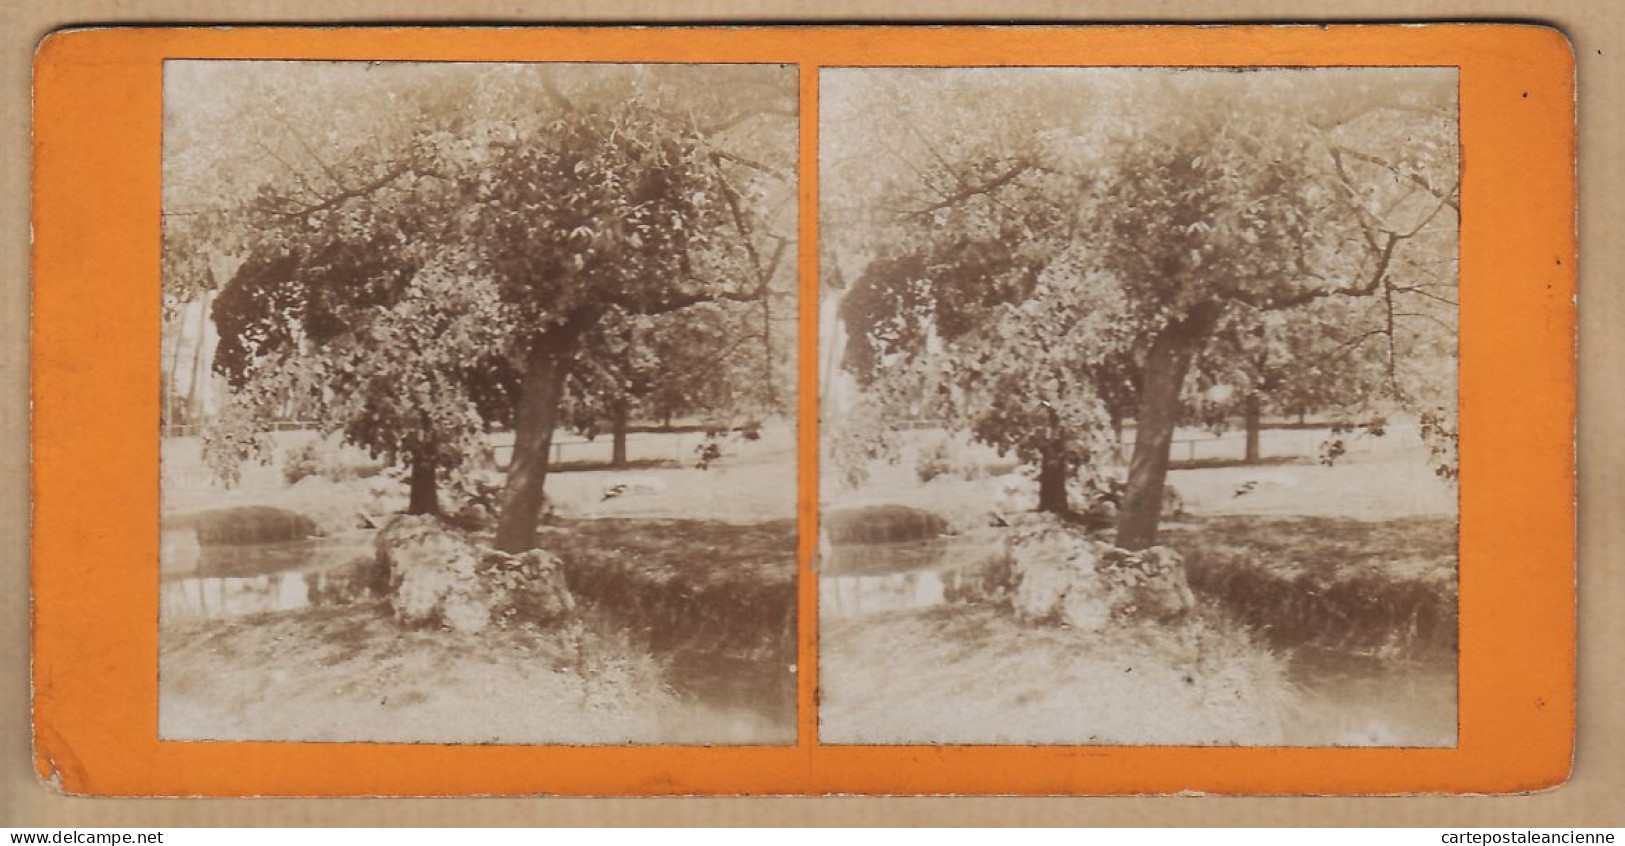 04568 / Stereo View 1890s Arbre OLIVIERS Olivier Olive Tree Photographie Botanique Flore  - Stereoscopic